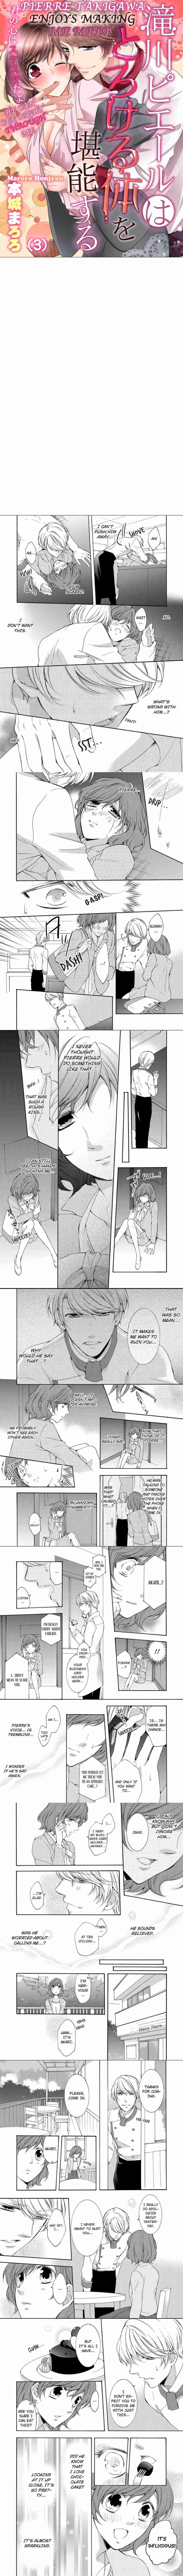 Pierre Takigawa Enjoys Making Me Melt / He can see right through me - Vol.1 Ch.3